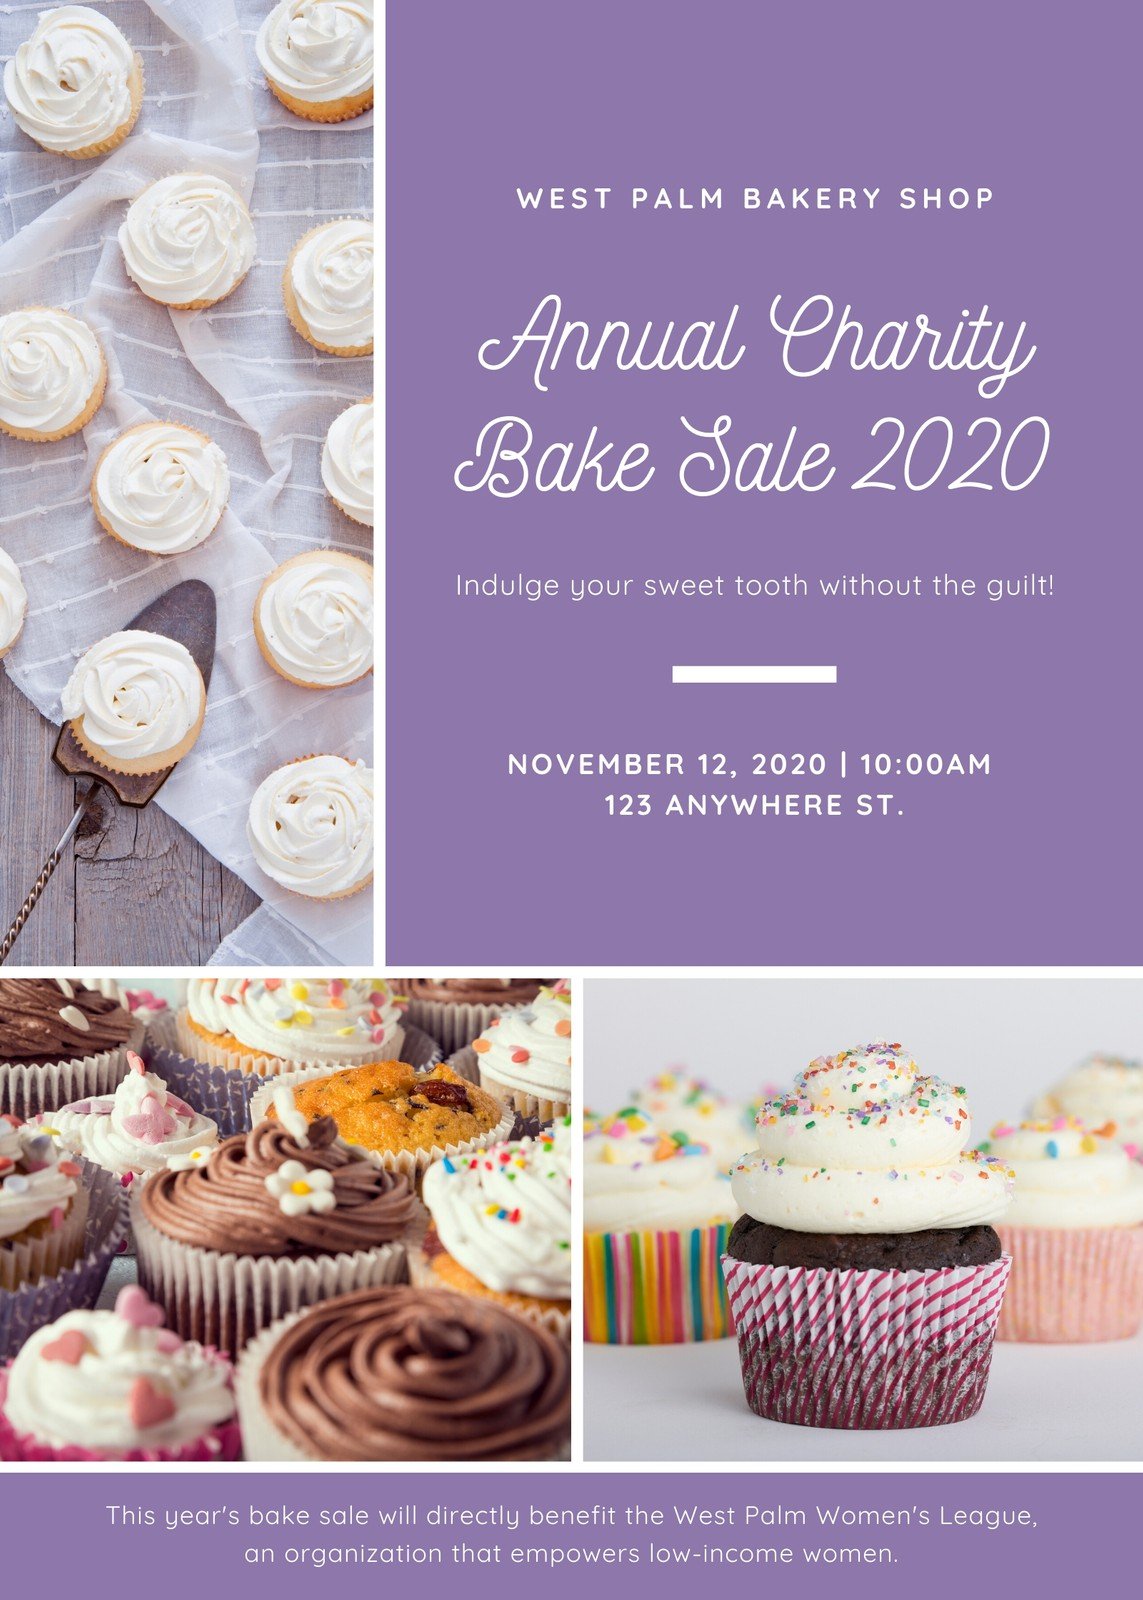 Customize 22+ Bake Sale Flyers Templates Online - Canva With Regard To Bake Off Flyer Template